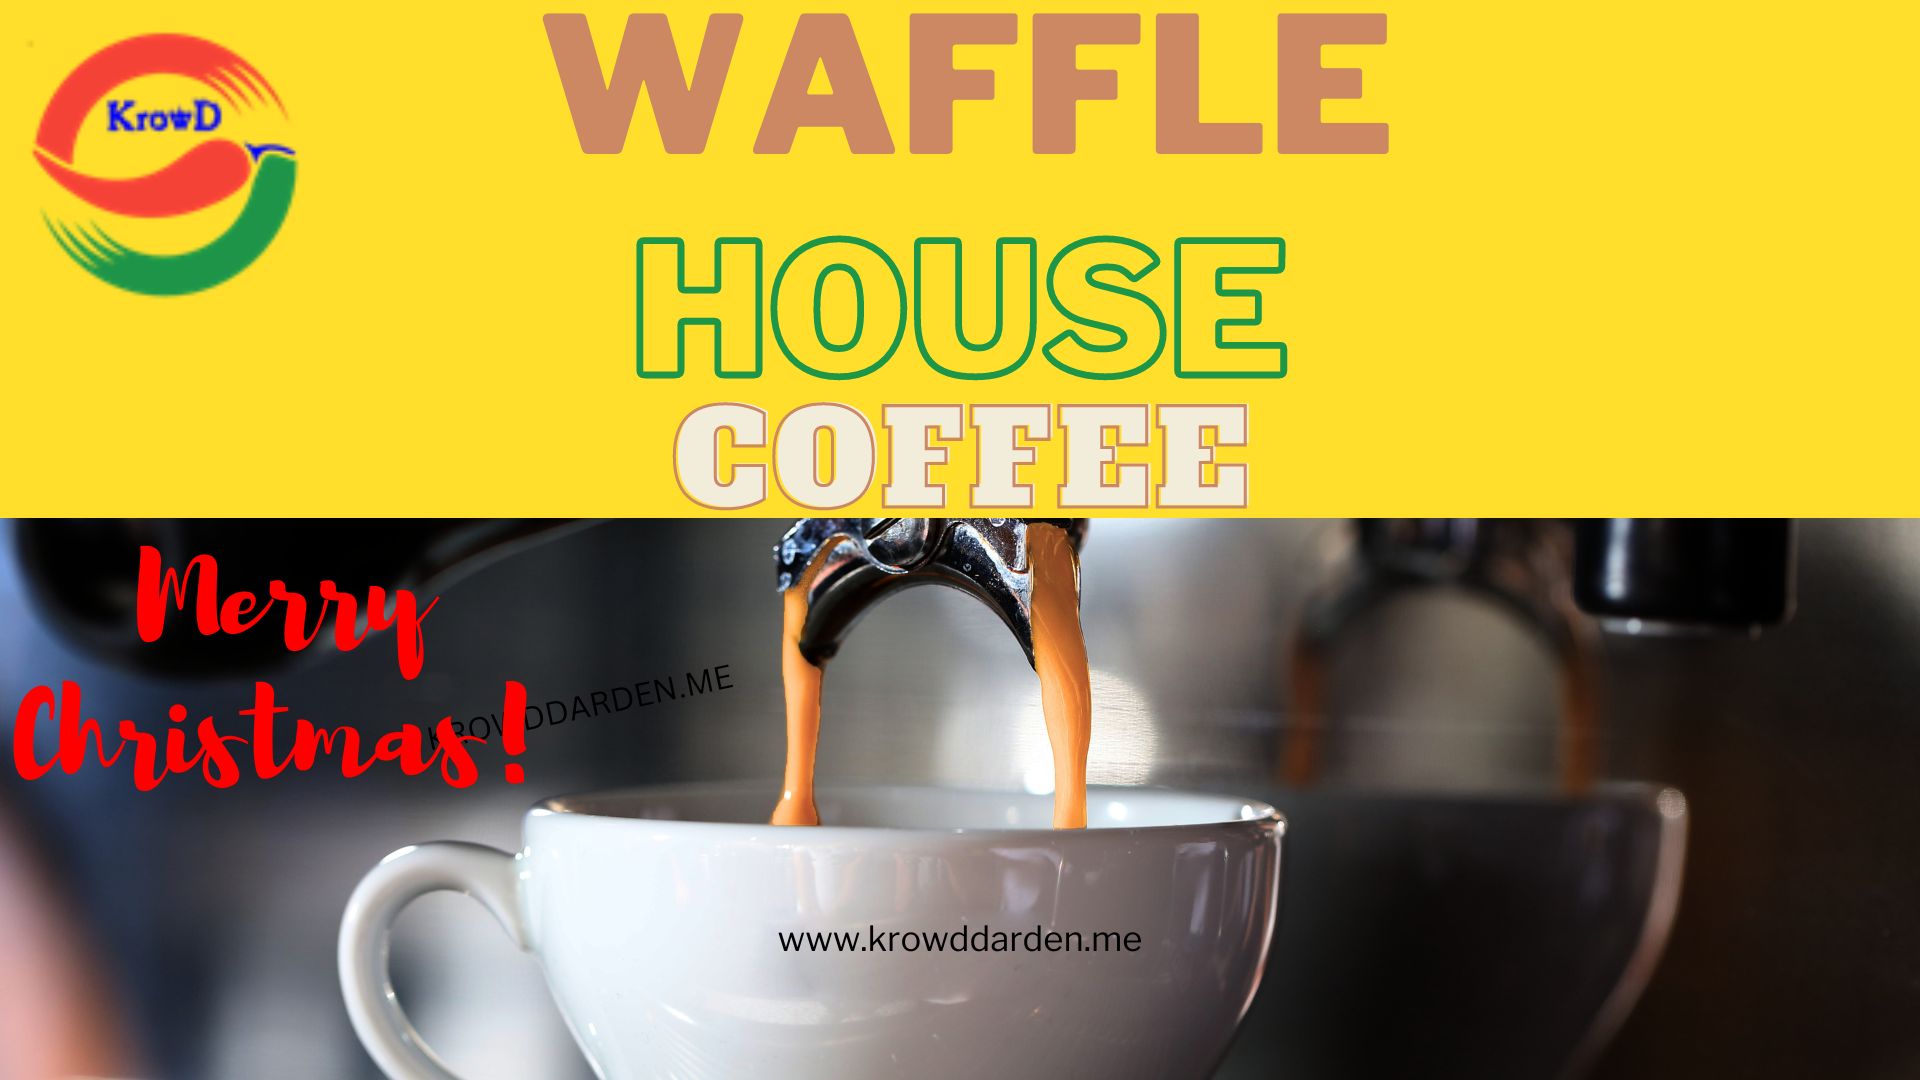 Waffle House order online | Waffle House prices | Waffle House merchandise | Waffle House Coffee | Waffle House Food